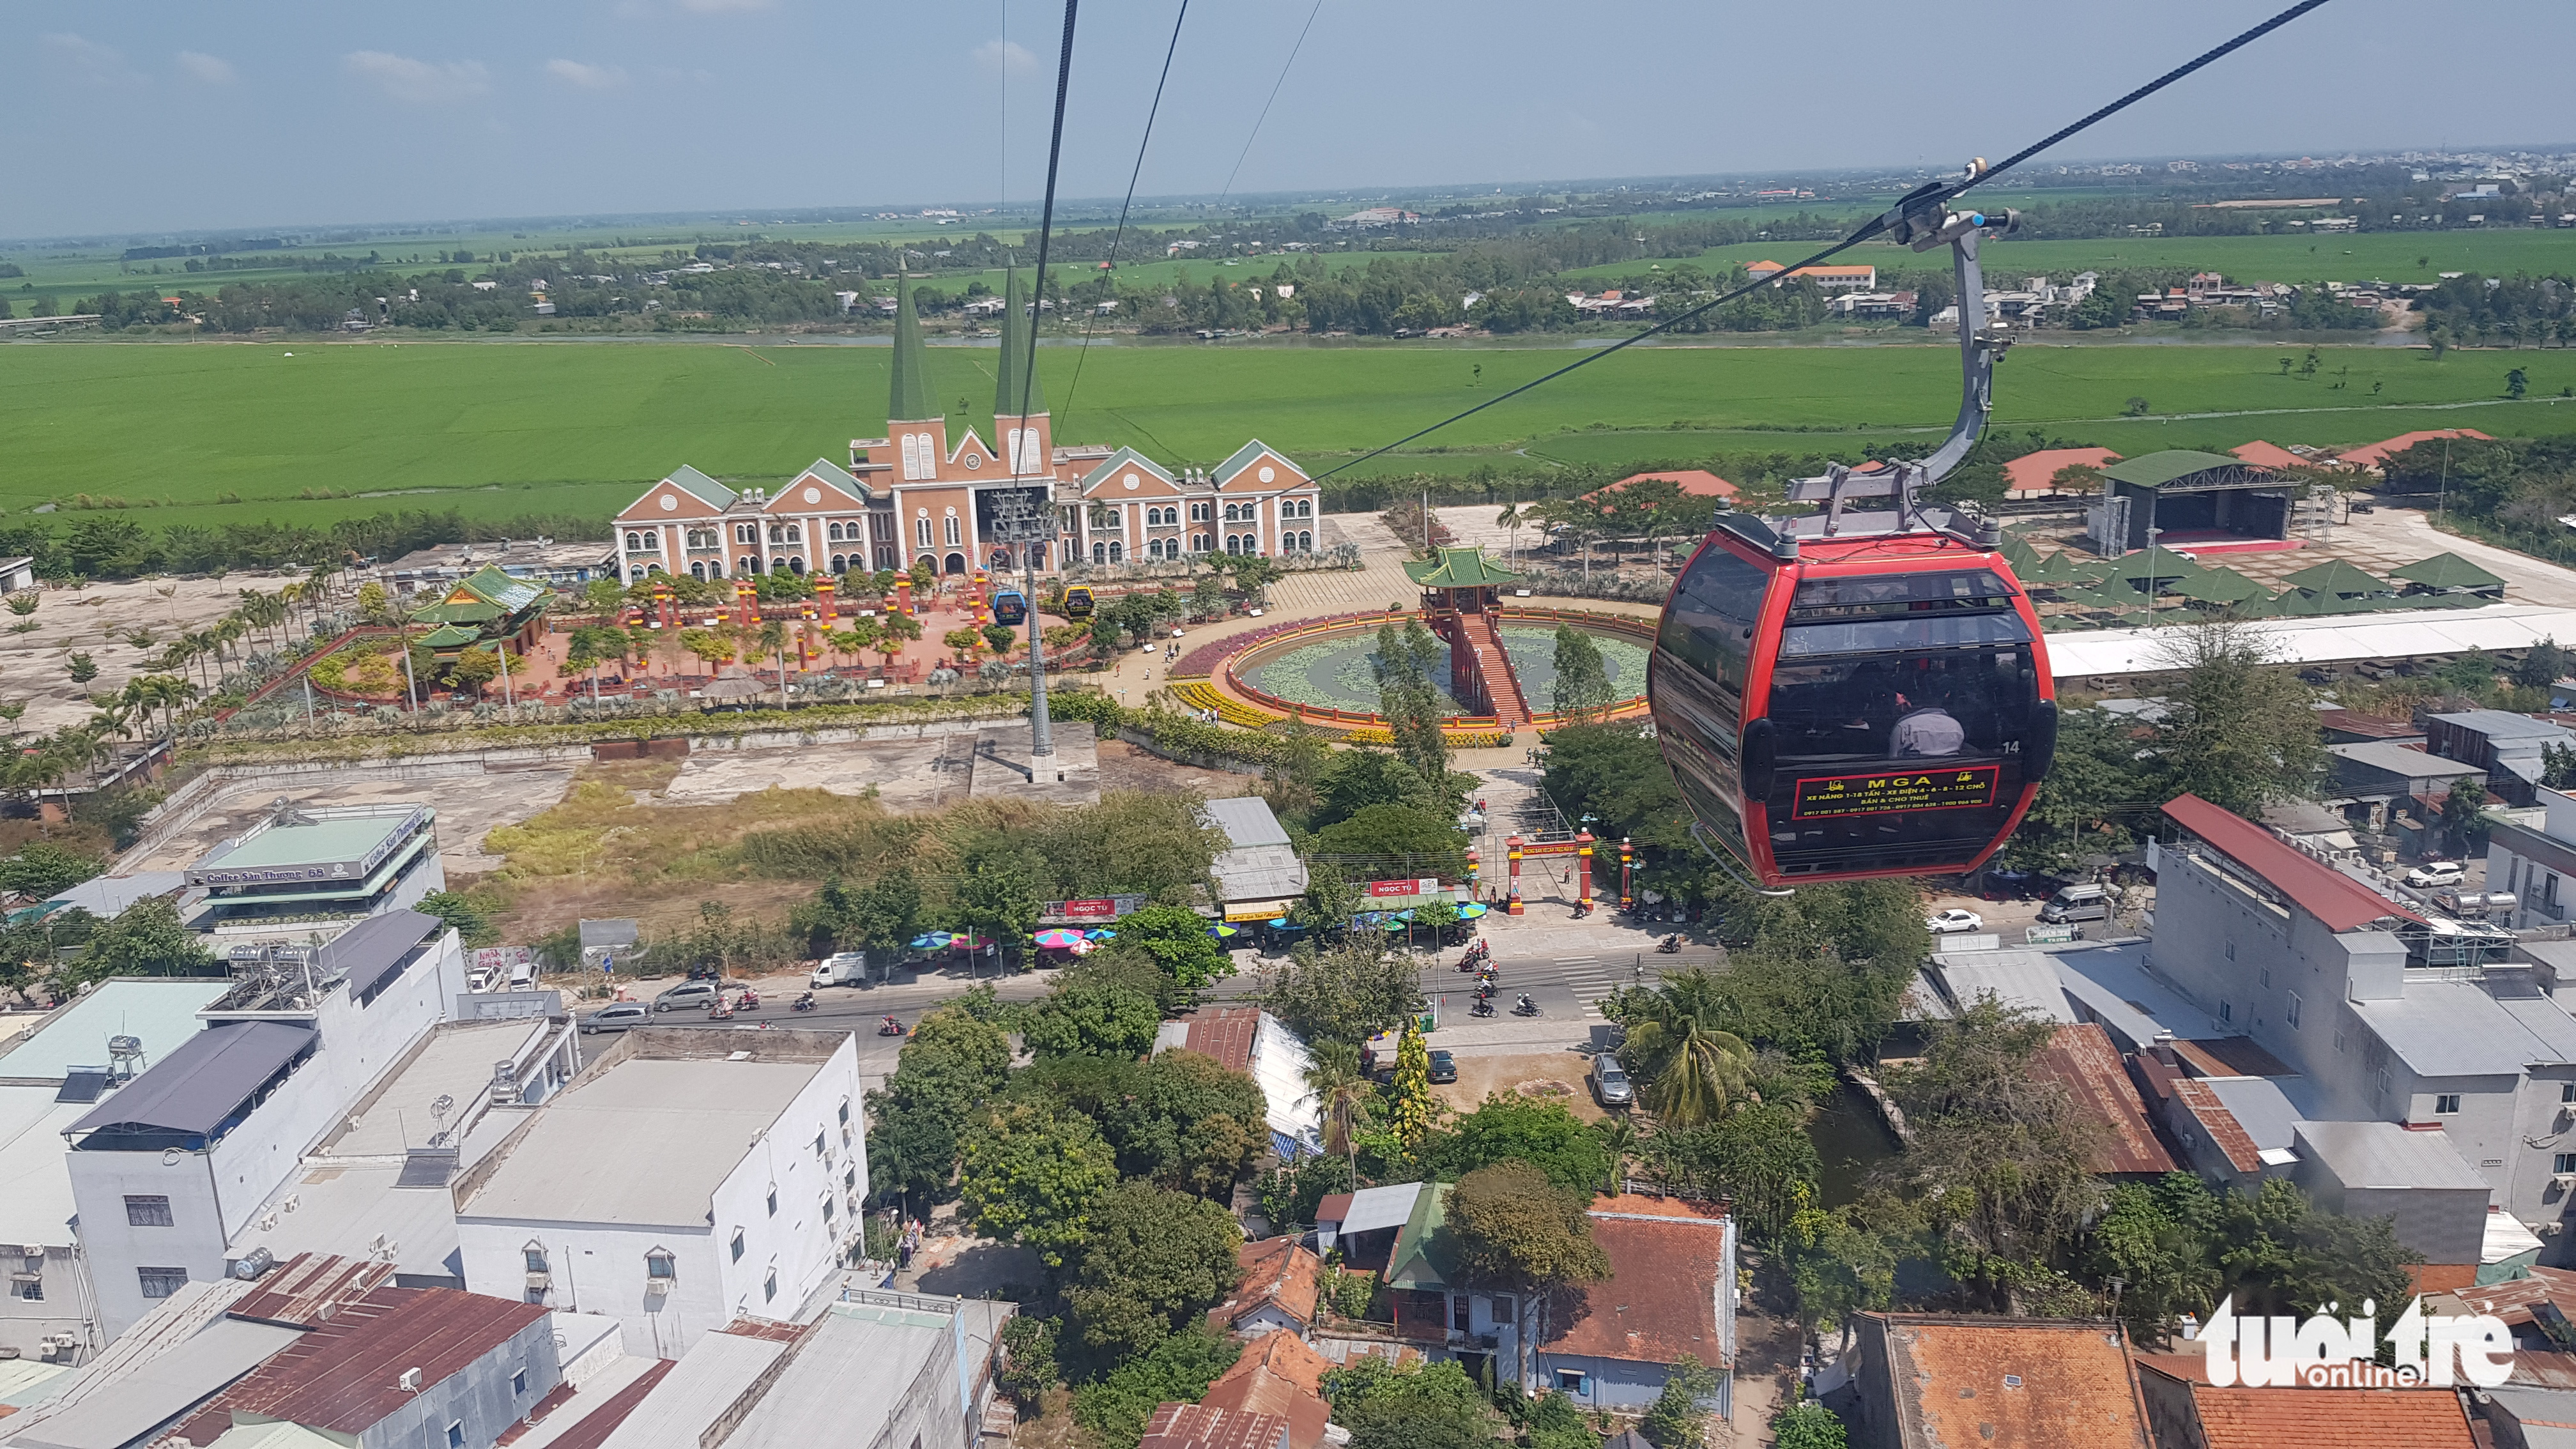 Sam Mountain cable car officially opens in Vietnam’s Mekong Delta